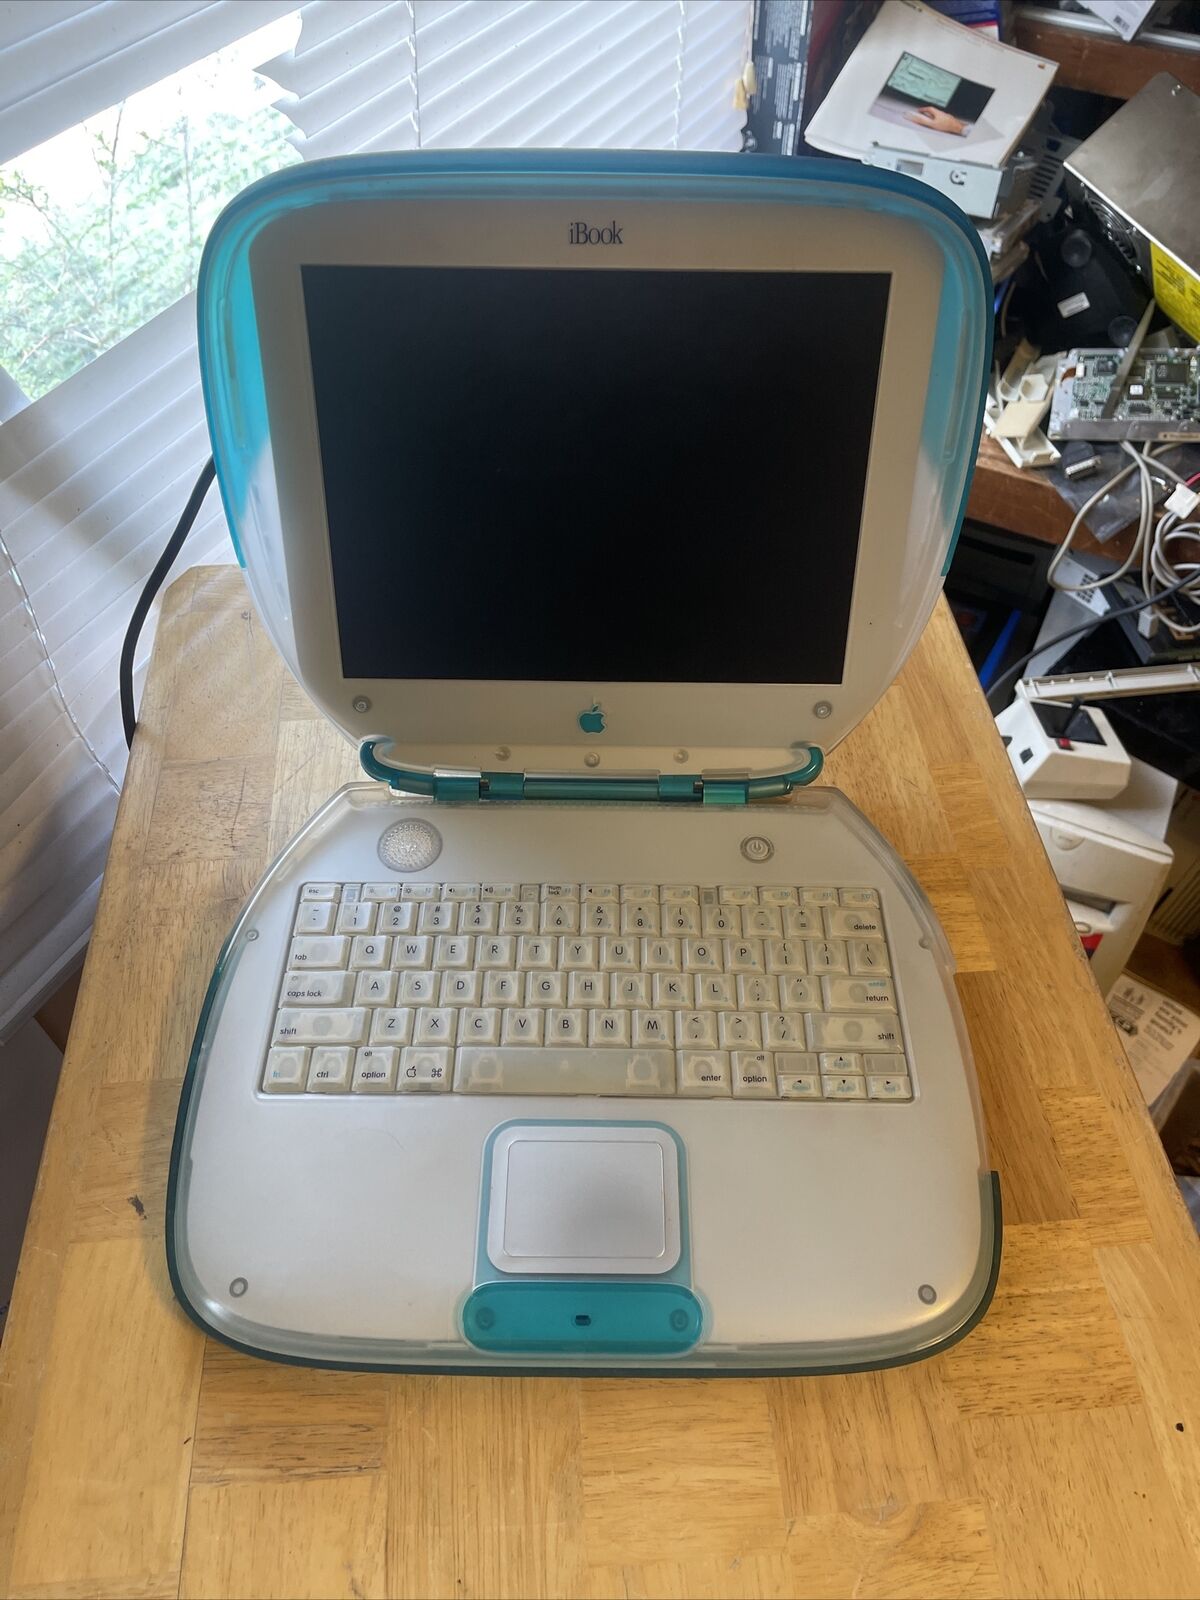 Apple iBook G3 Blue Clamshell Laptop Notebook  - Powers boots to linux no PSU